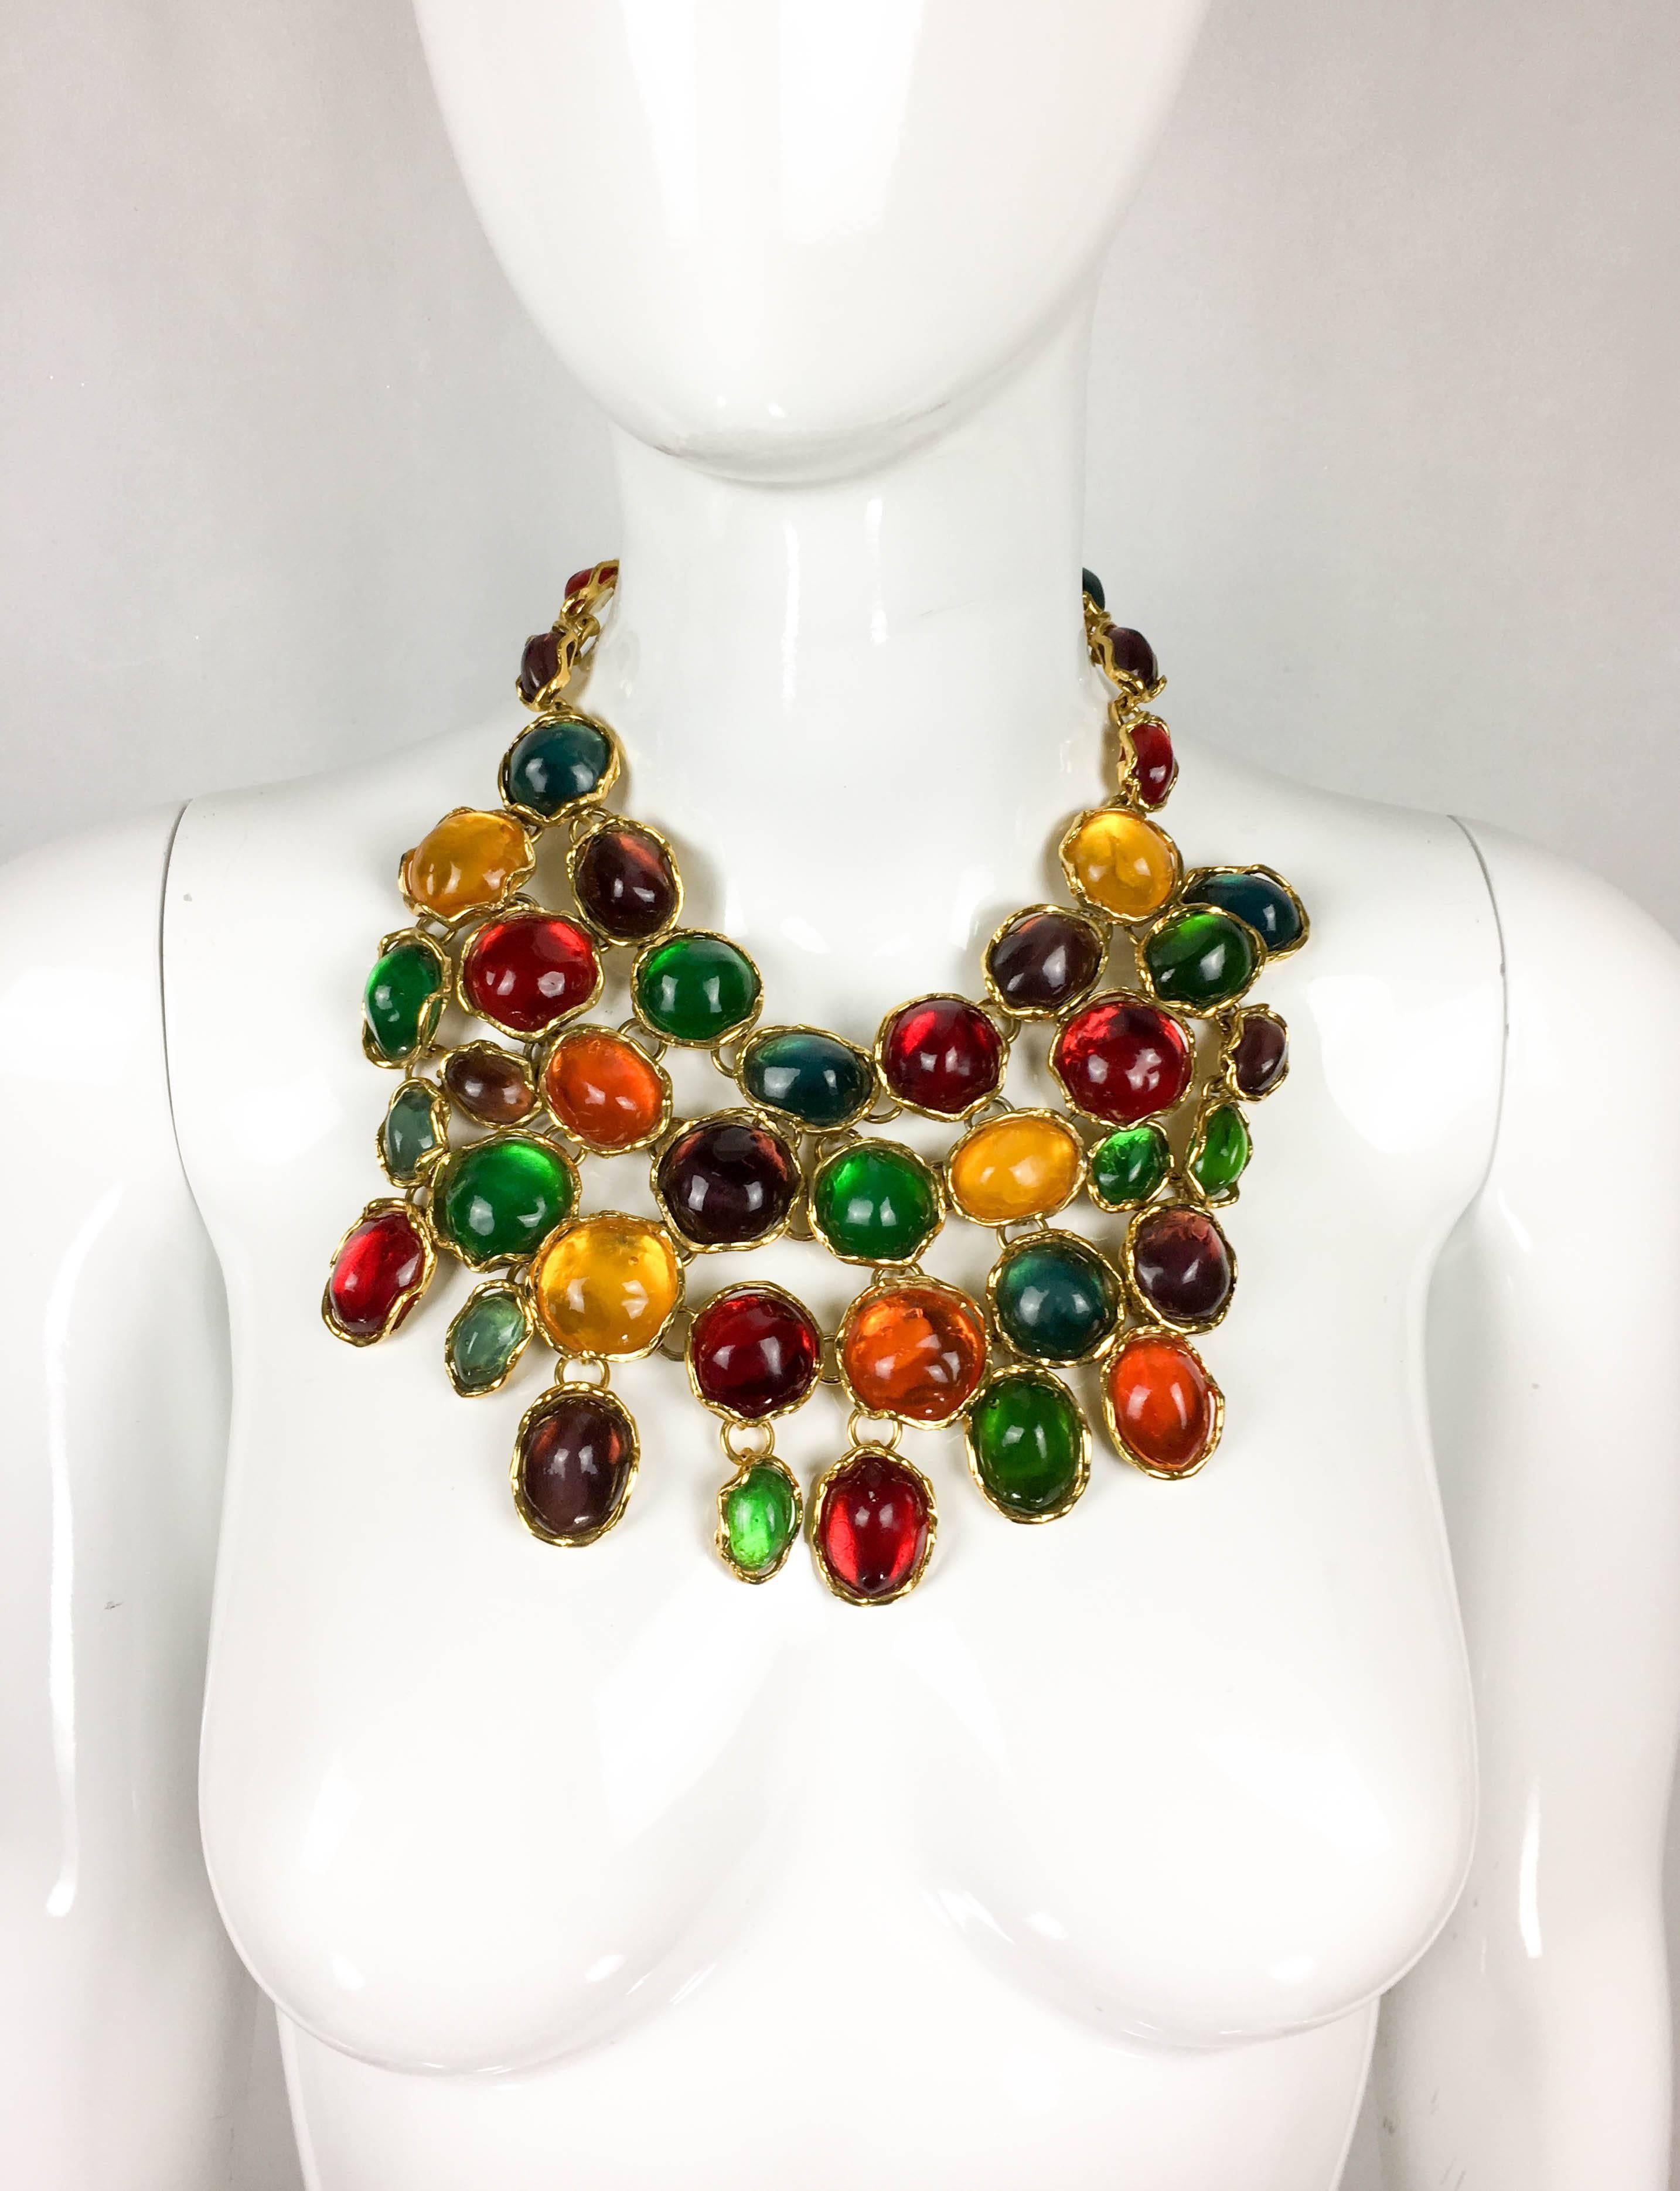 1990 Yves Saint Laurent Chunky Colourful Resin Gem Bib Necklace In Excellent Condition For Sale In London, Chelsea